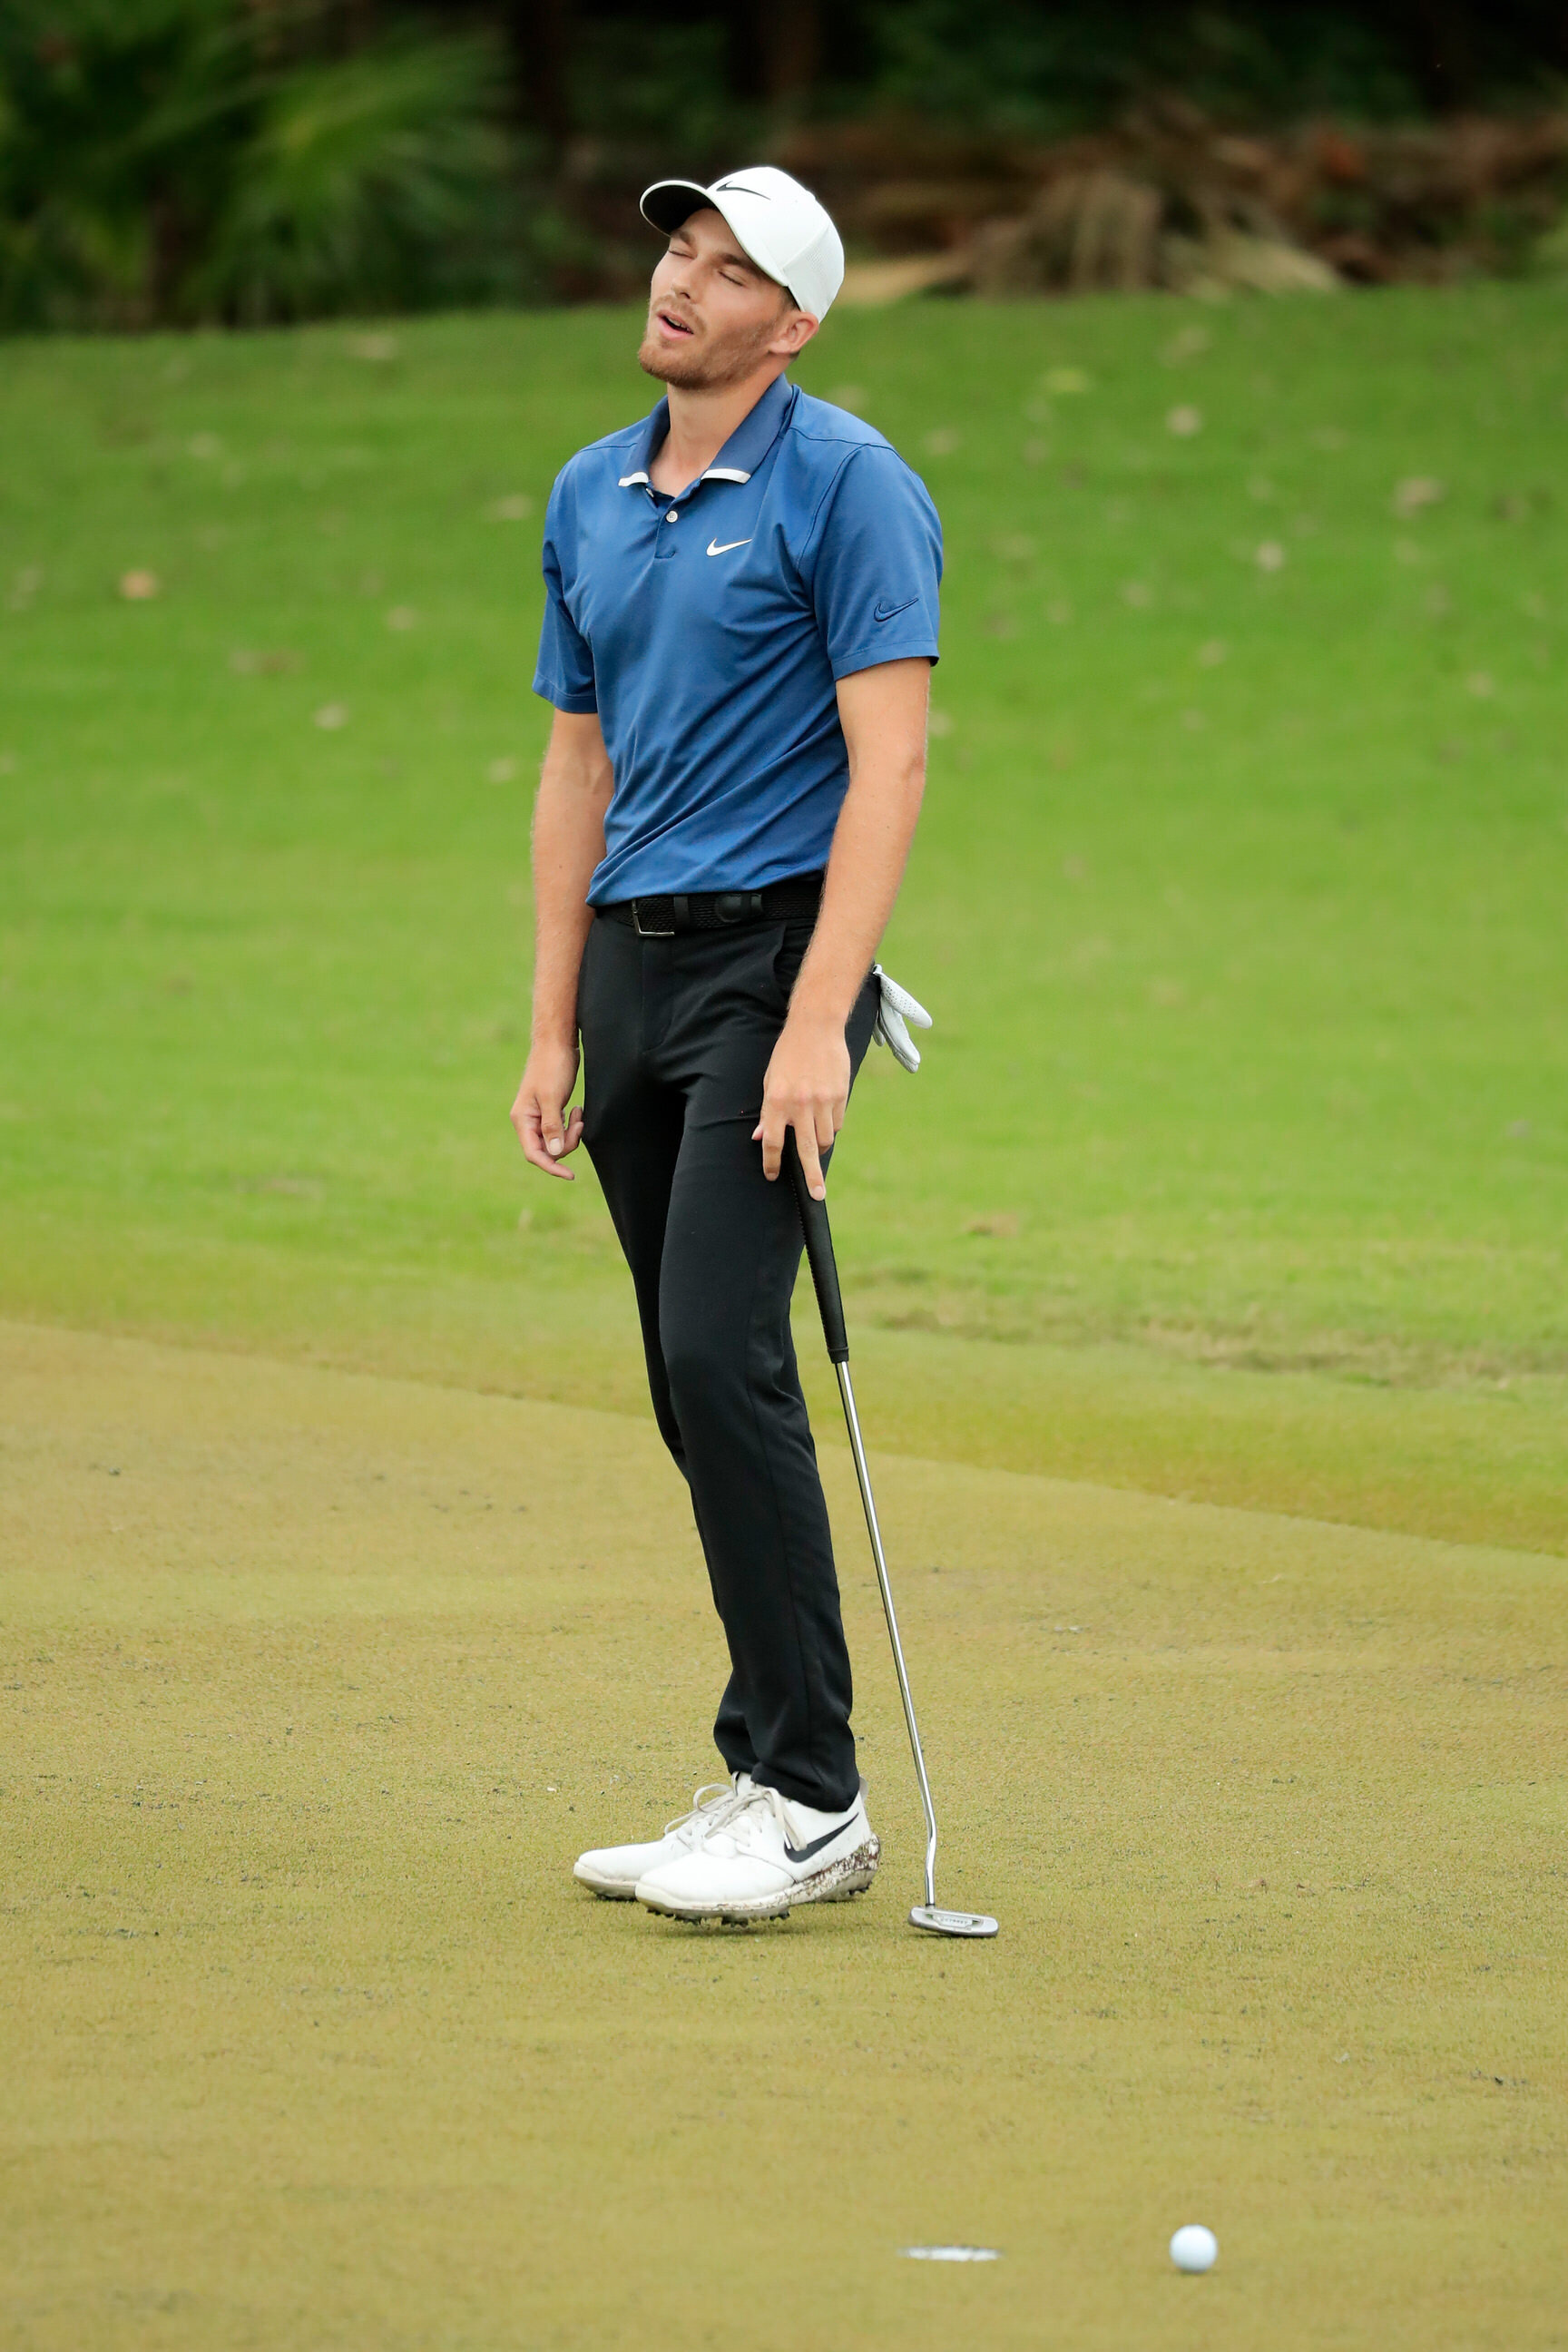  PLAYA DEL CARMEN, MEXICO - DECEMBER 06: Aaron Wise of the United States reacts to his missed birdie putt on the 18th green during the final round of the Mayakoba Golf Classic at El Camaleón Golf Club on December 06, 2020 in Playa del Carmen, Mexico.